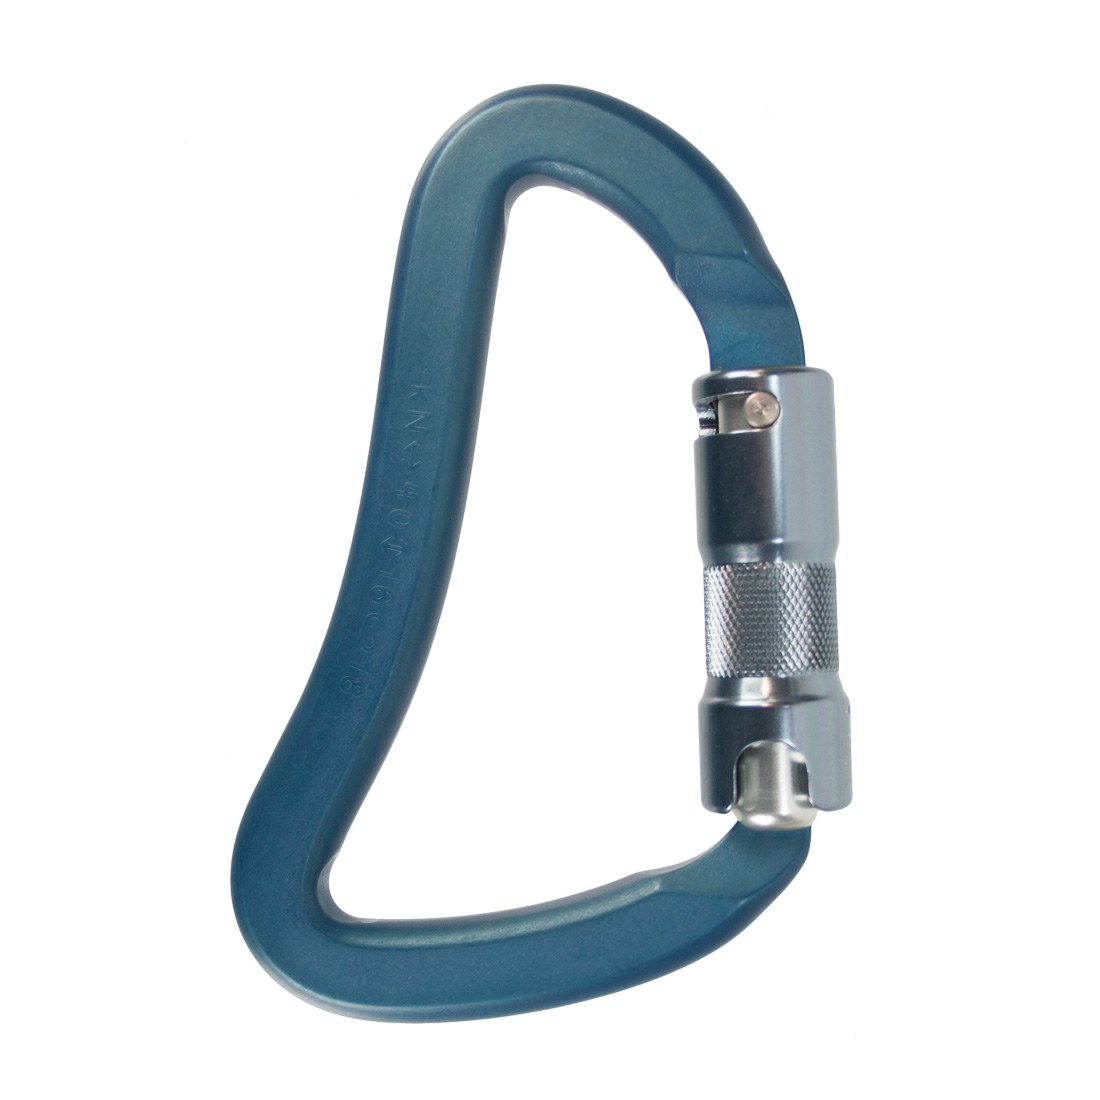 SMC Aluminum Crossover Carabiner - Triple Lock - Inverted Right Side View